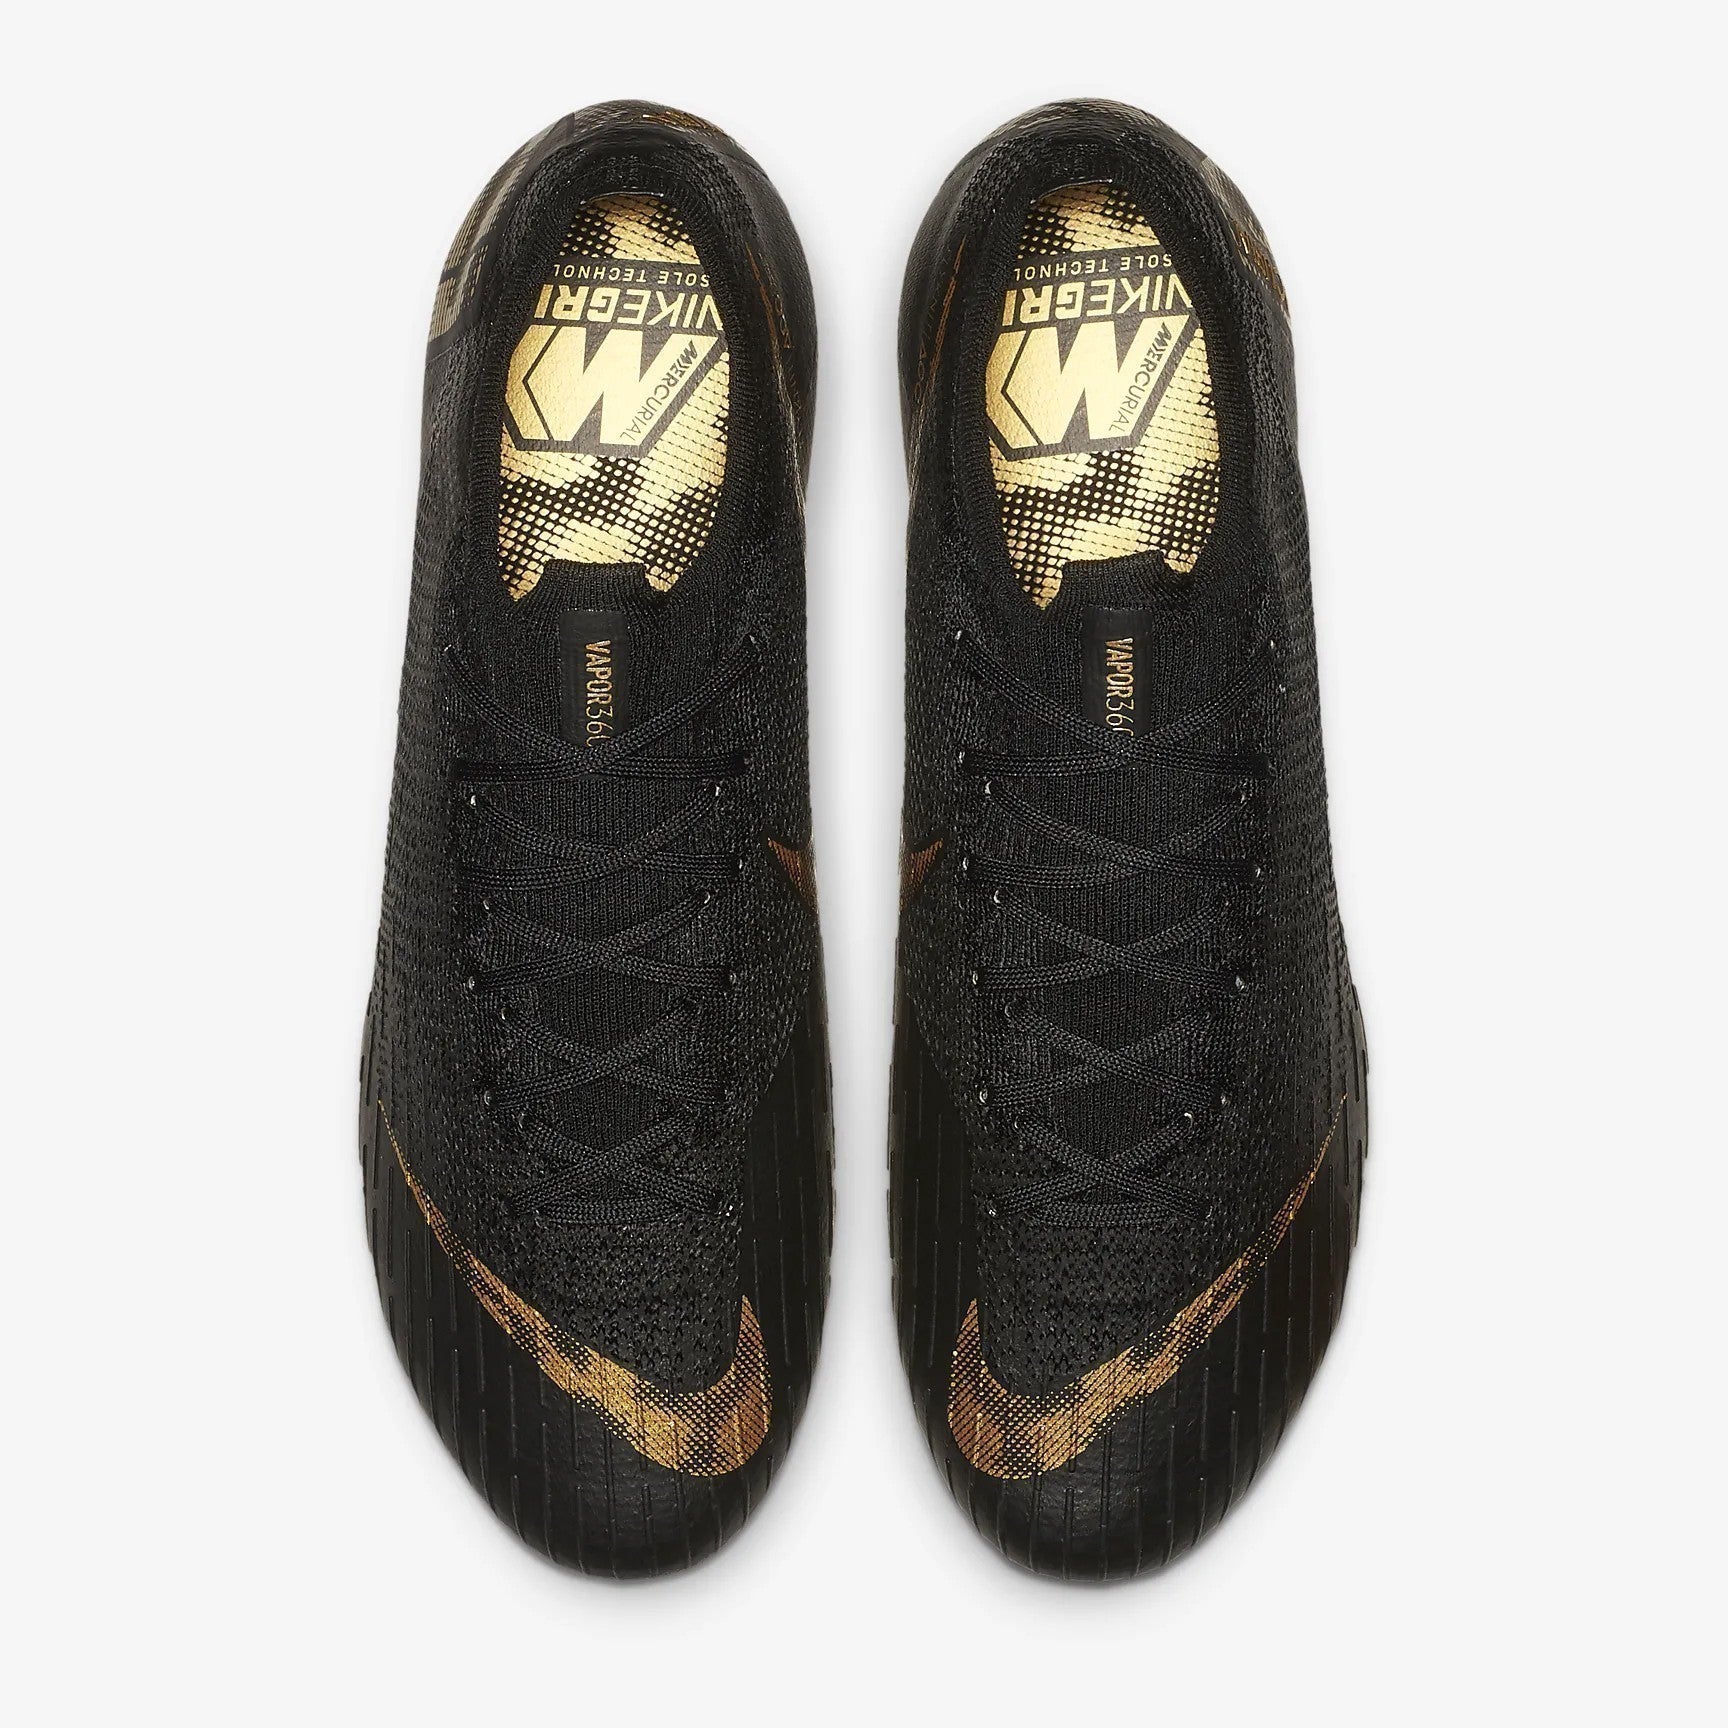 black and gold cleats soccer